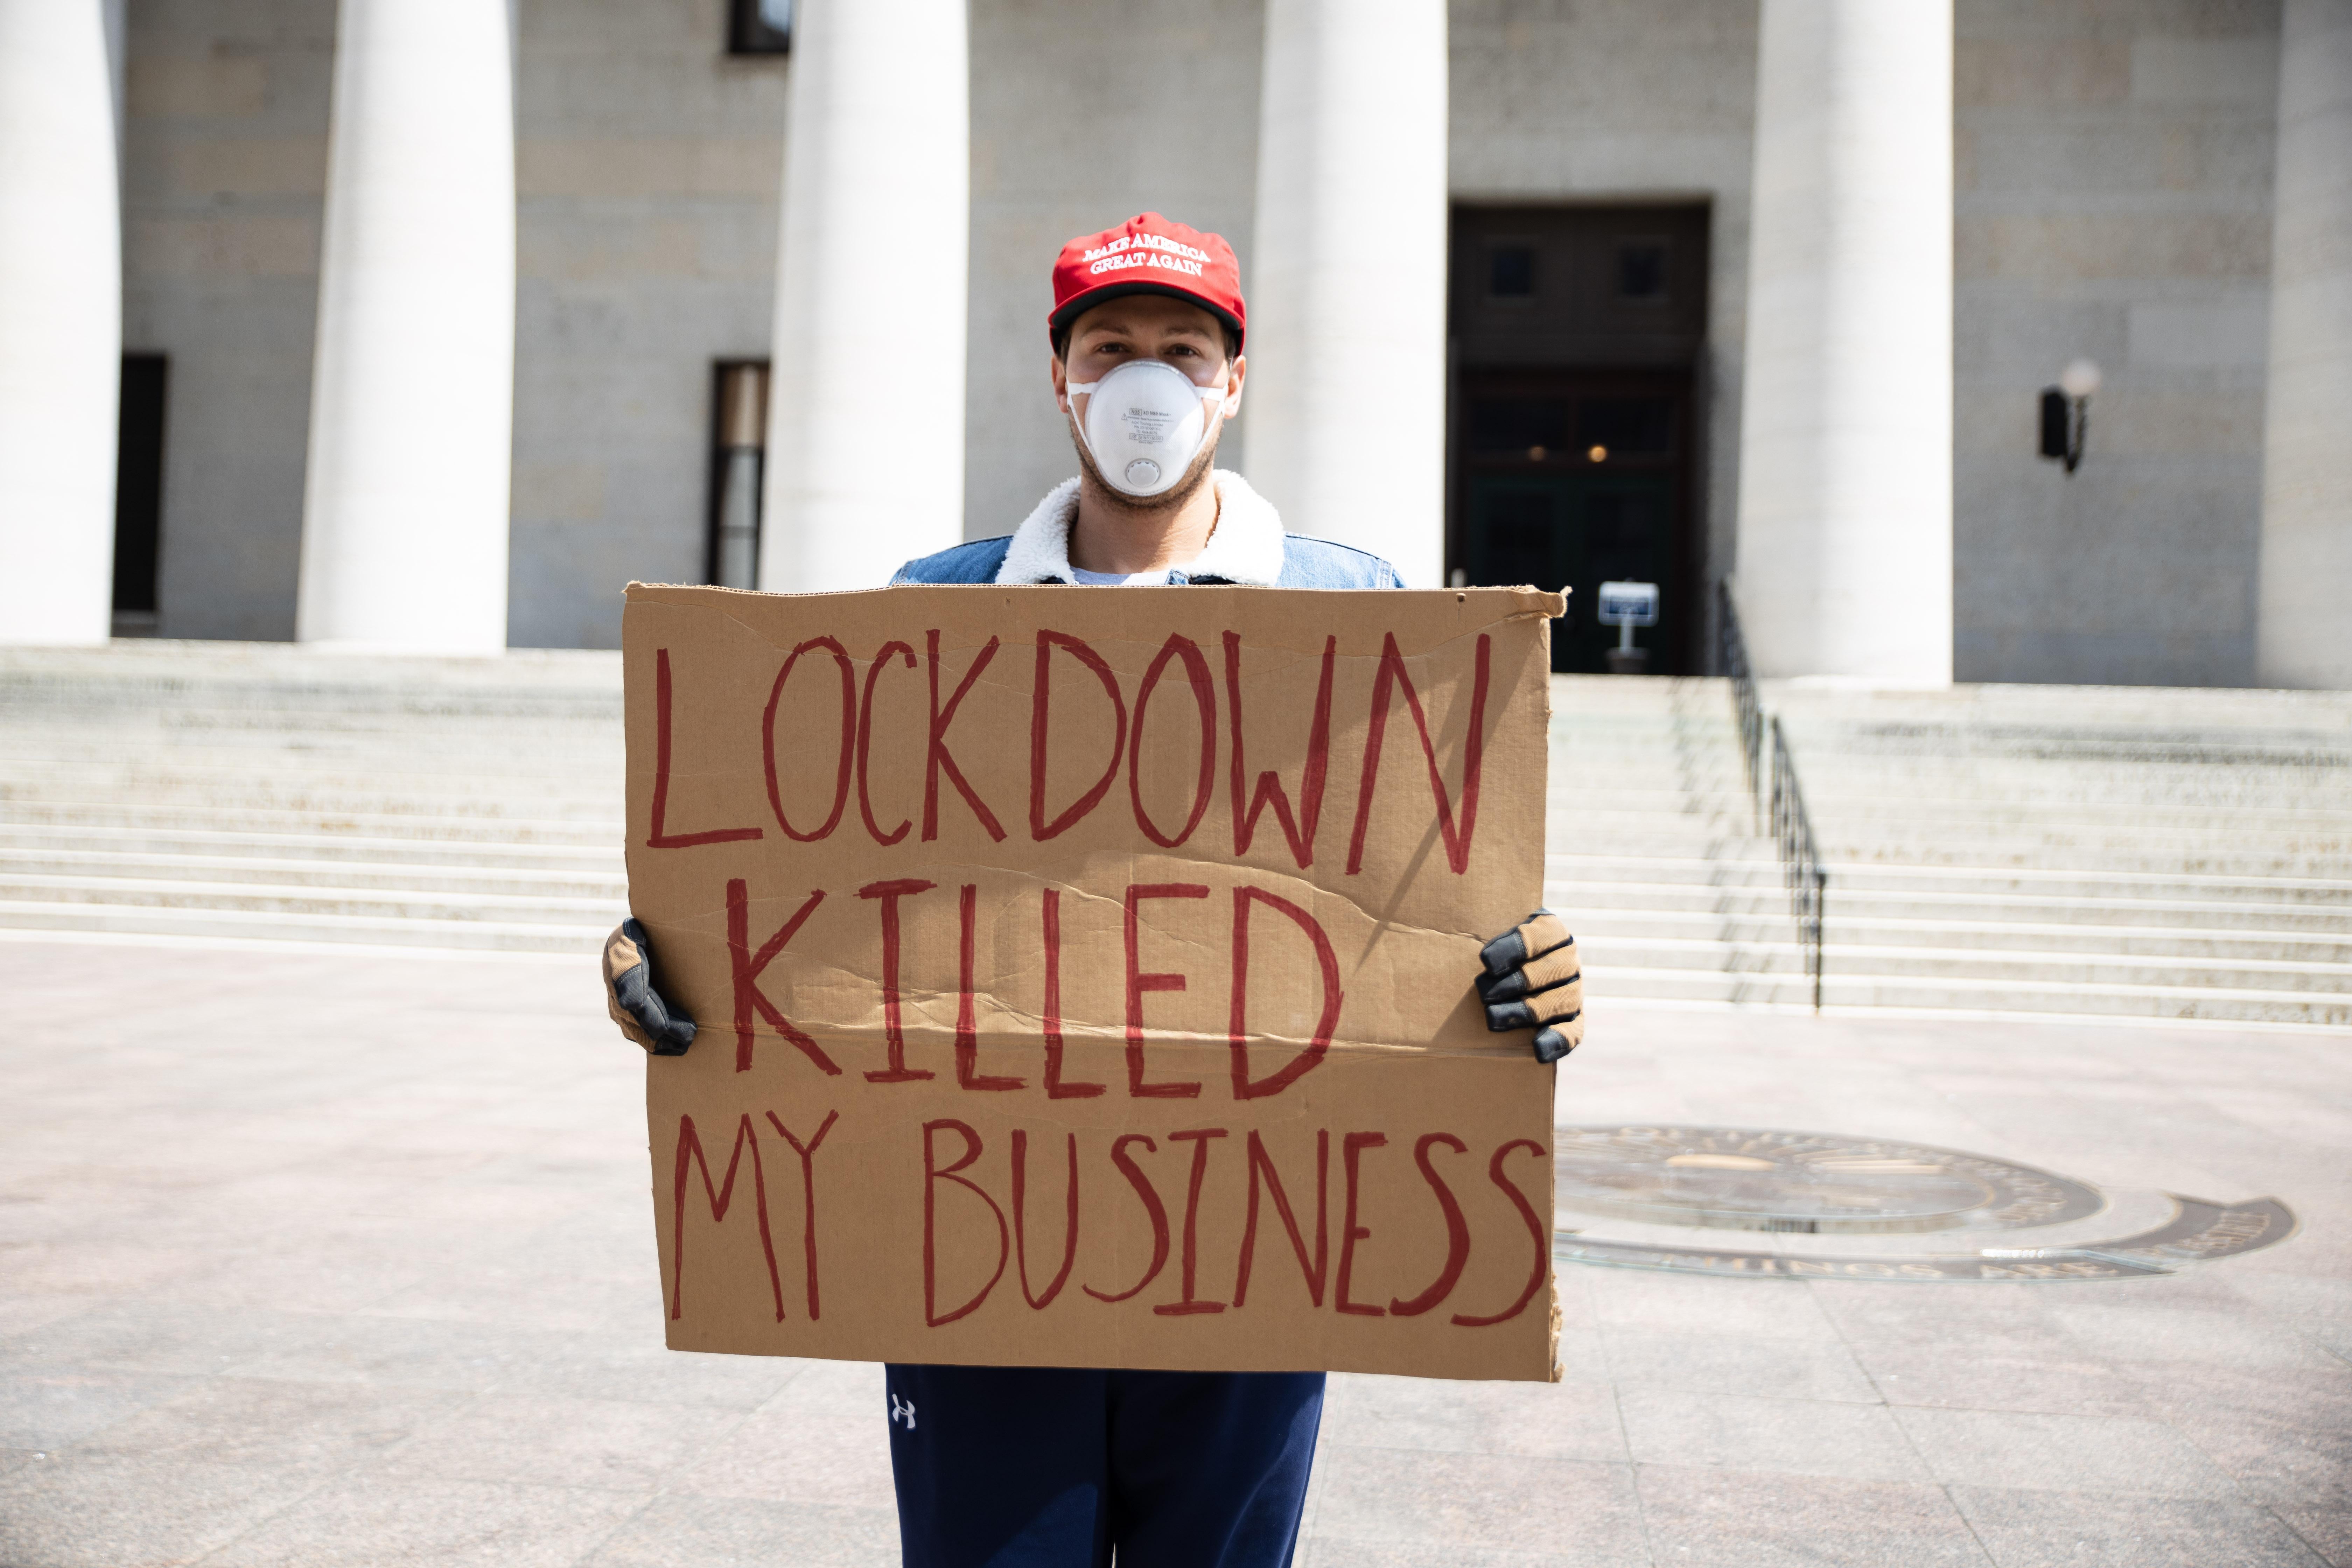 A protester wearing a MAGA hat and a medical mask holds a sign that says "Lockdown killed my business"